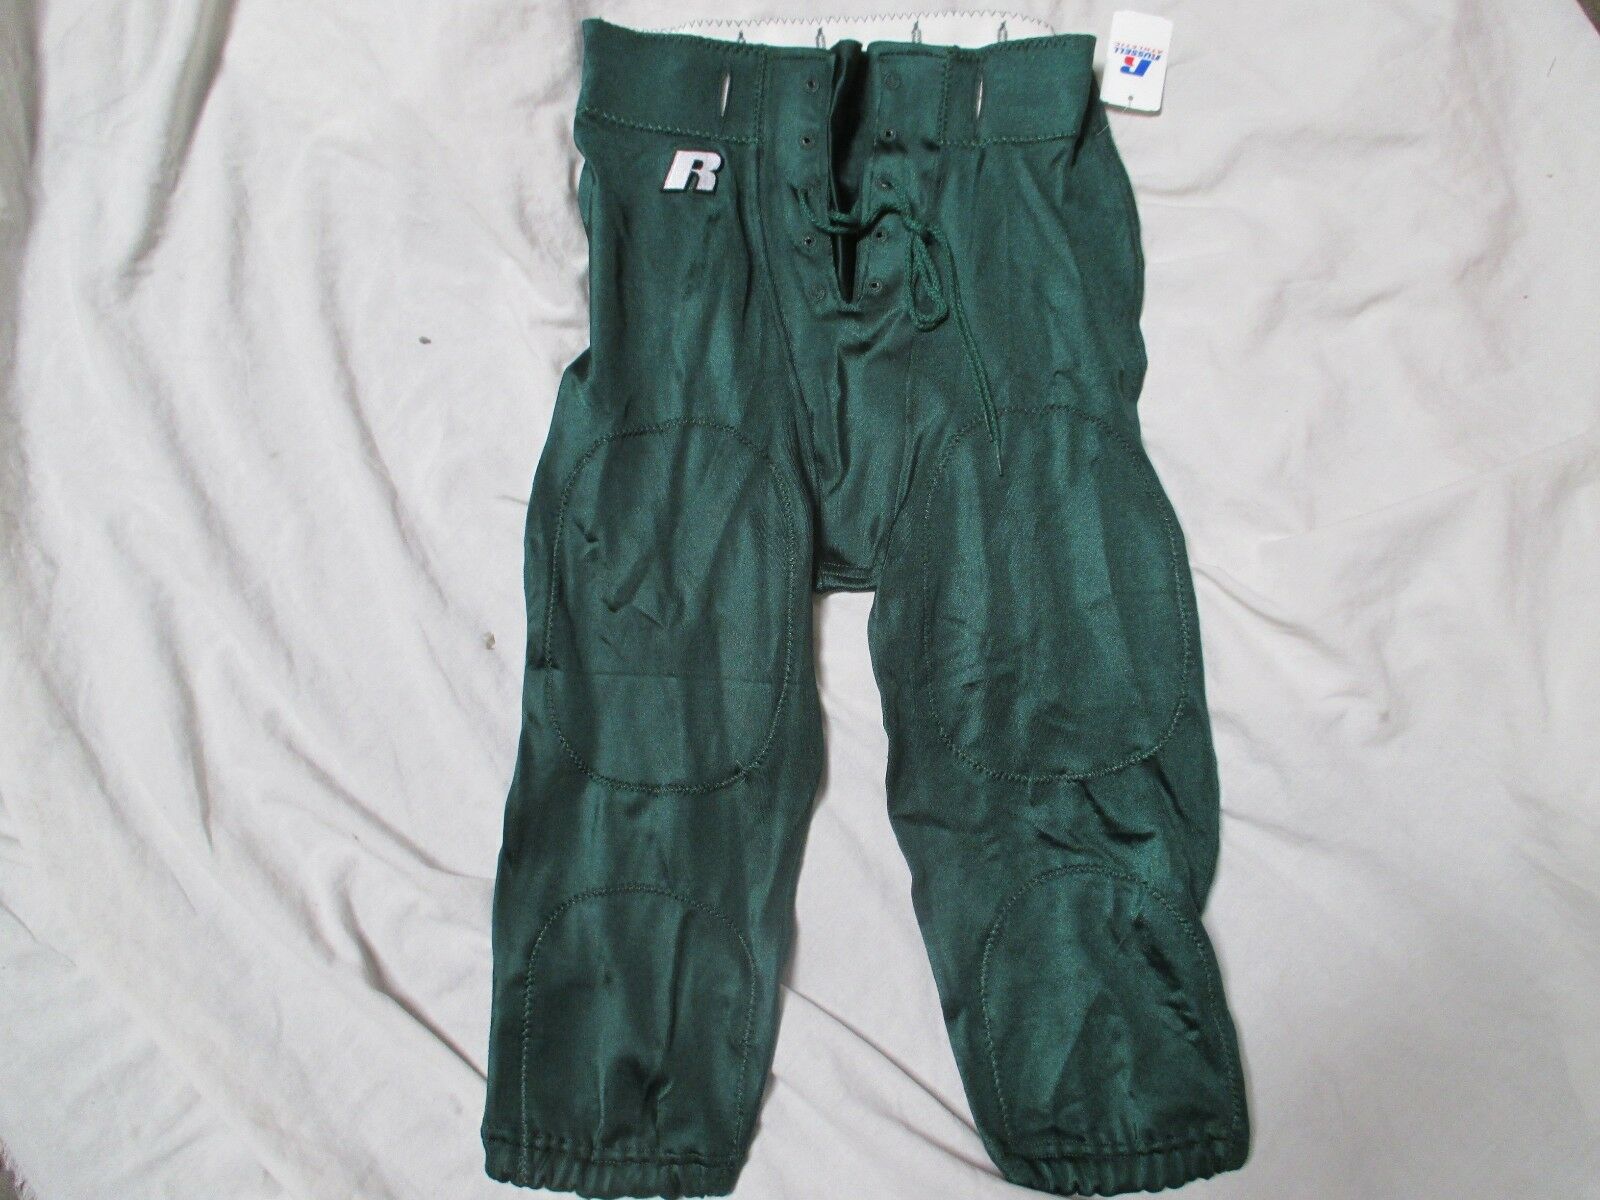 RUSSELL F1662MK ADULT FOOTBALL GAME PANTS  -VARIOUS SIZES & COLORS